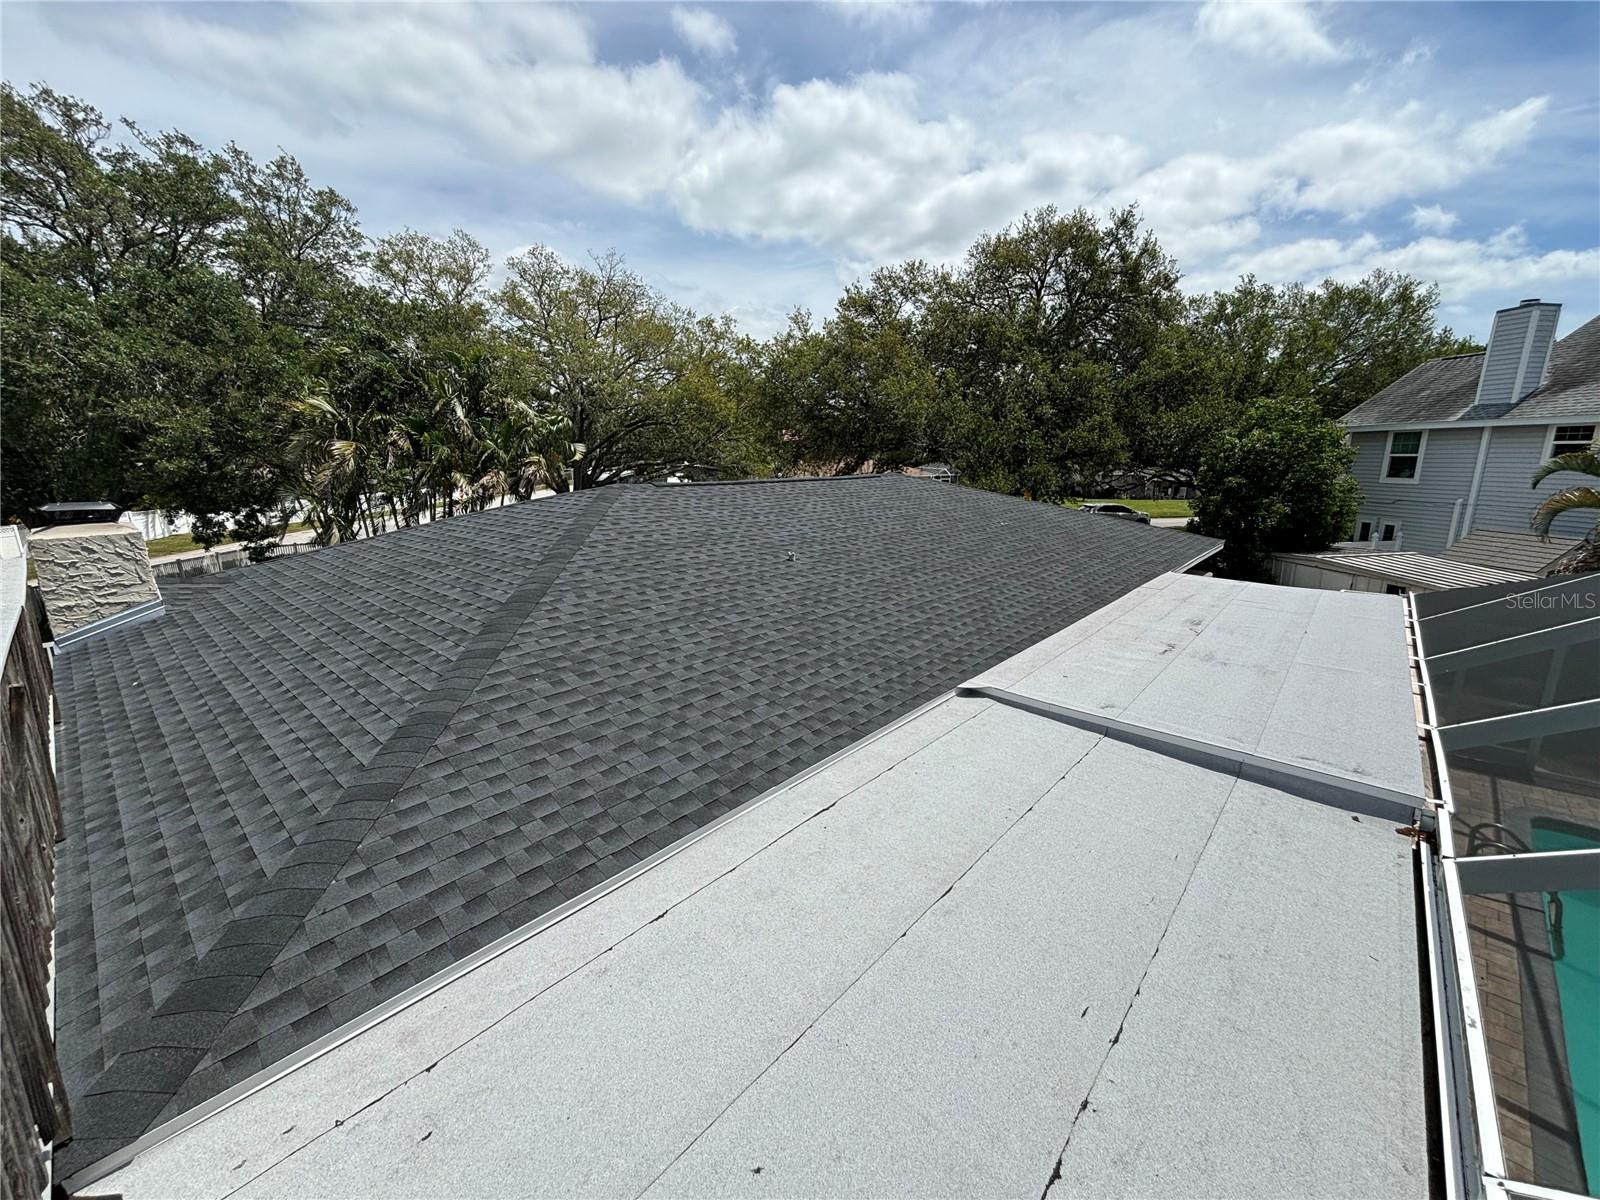 brand new shingle roof, also on the detached garage